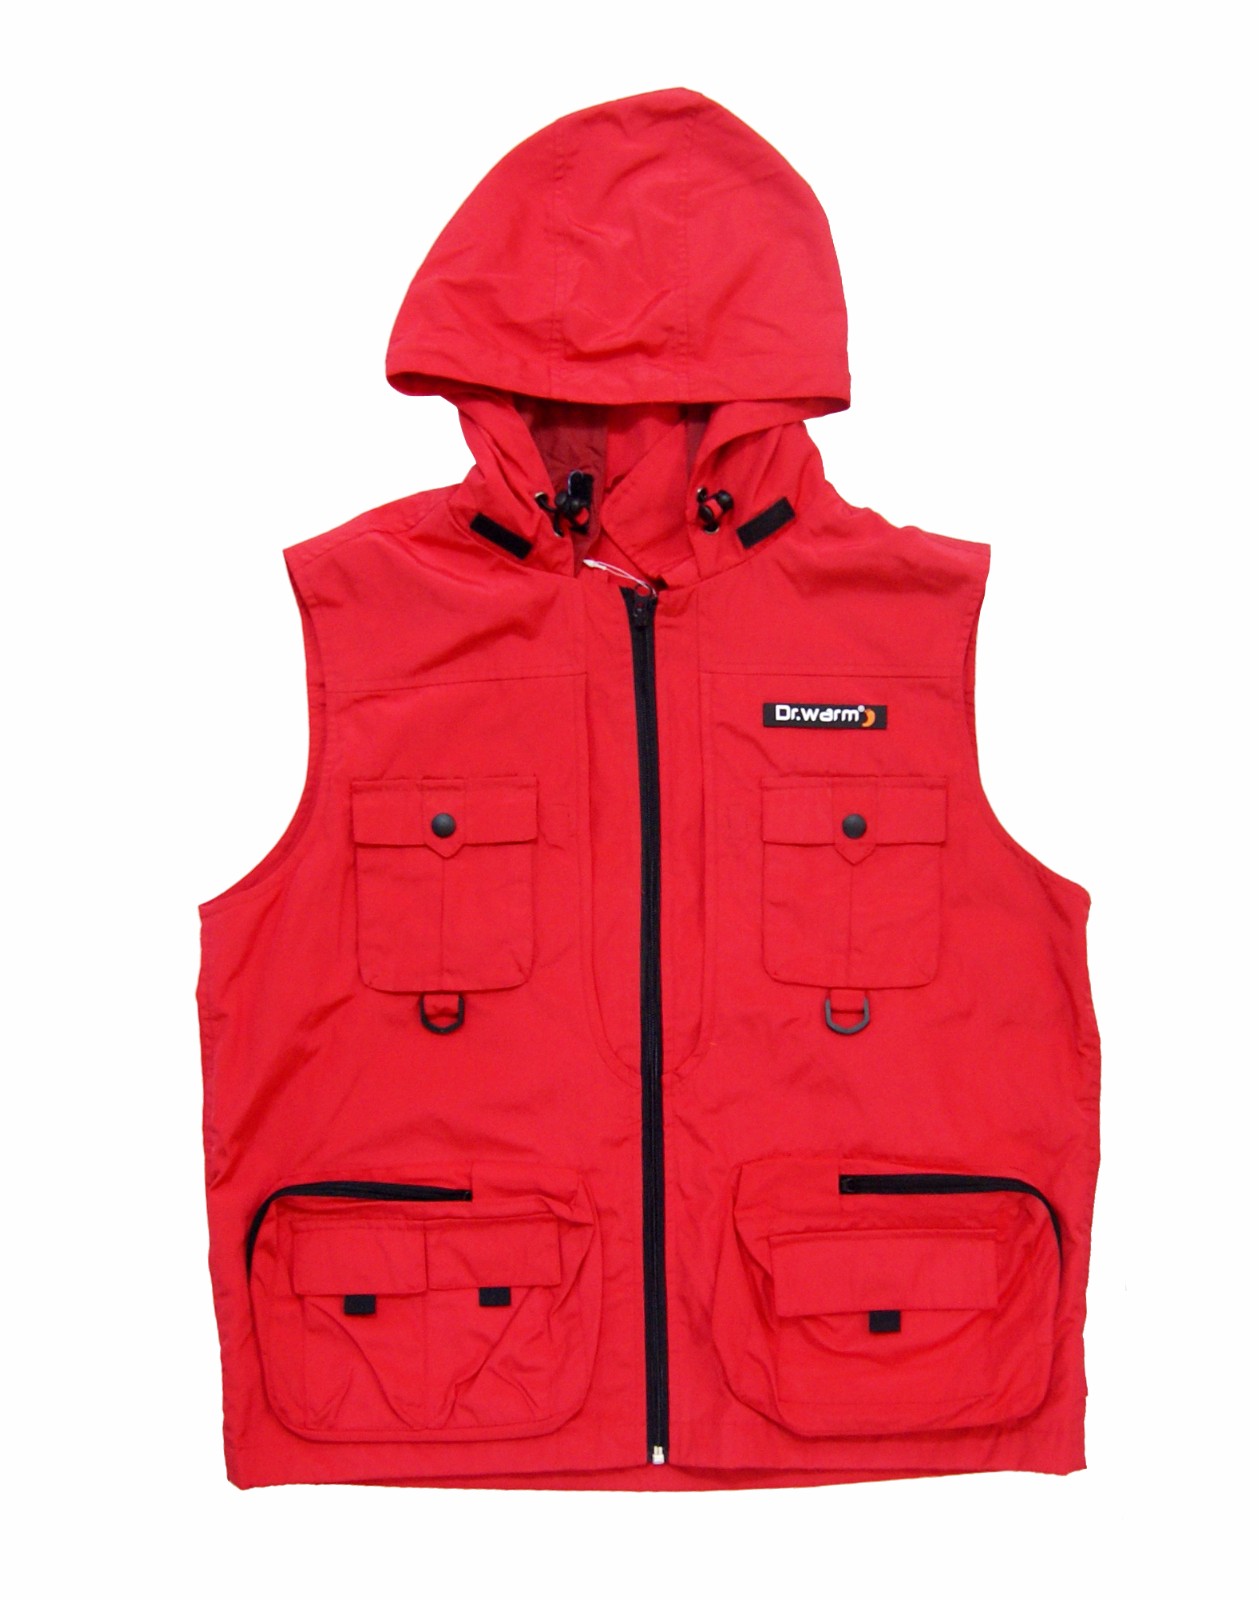 Dr. Warm healthy heated vest mens with prined pattern for outdoor-9